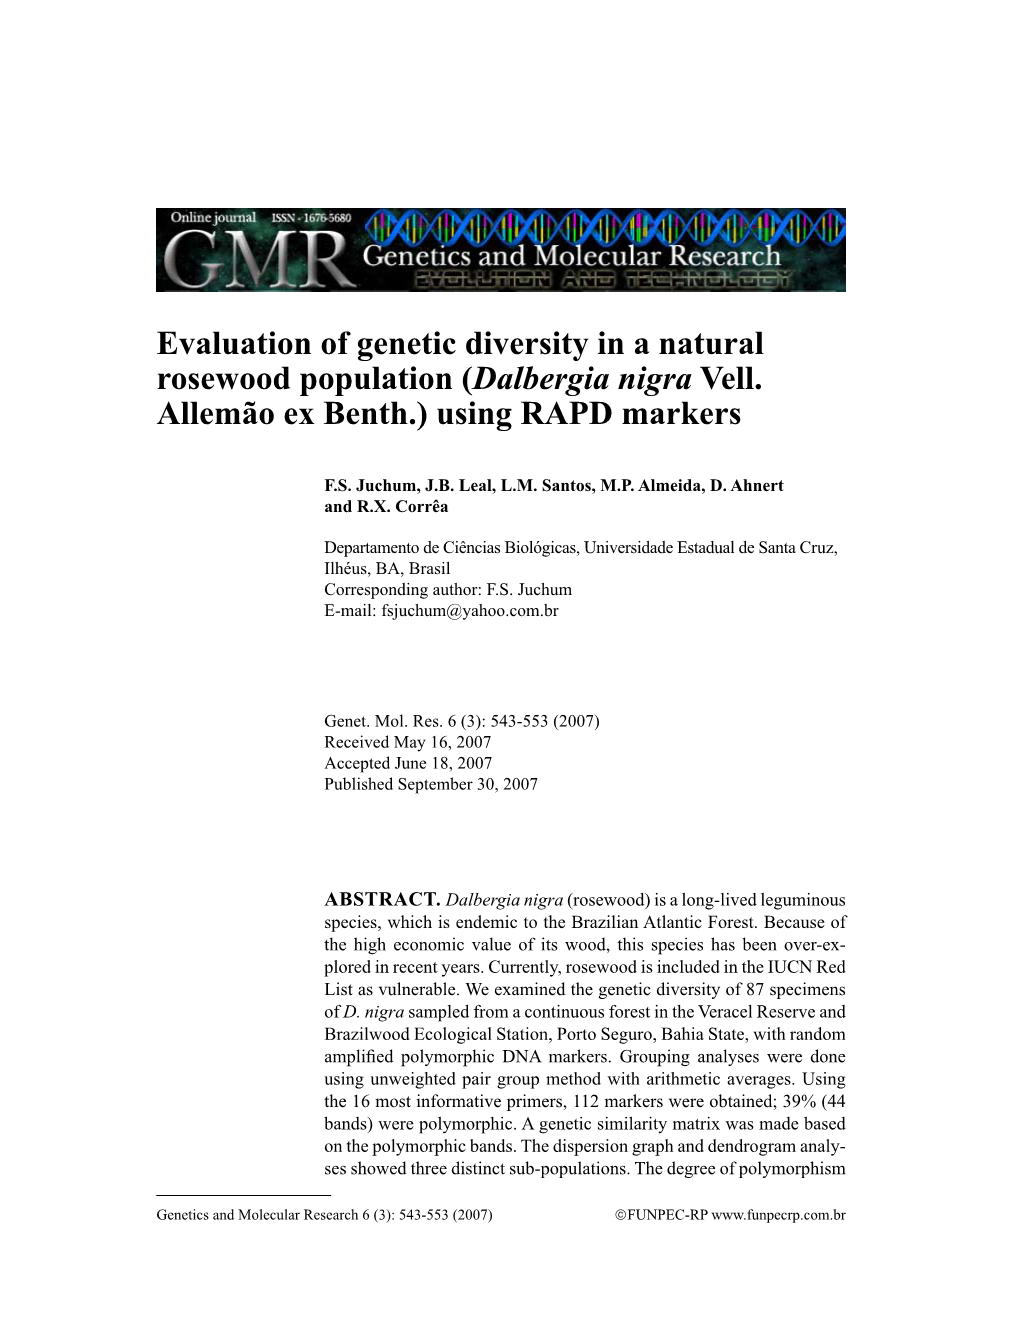 Evaluation of Genetic Diversity in a Natural Rosewood Population (Dalbergia Nigra Vell